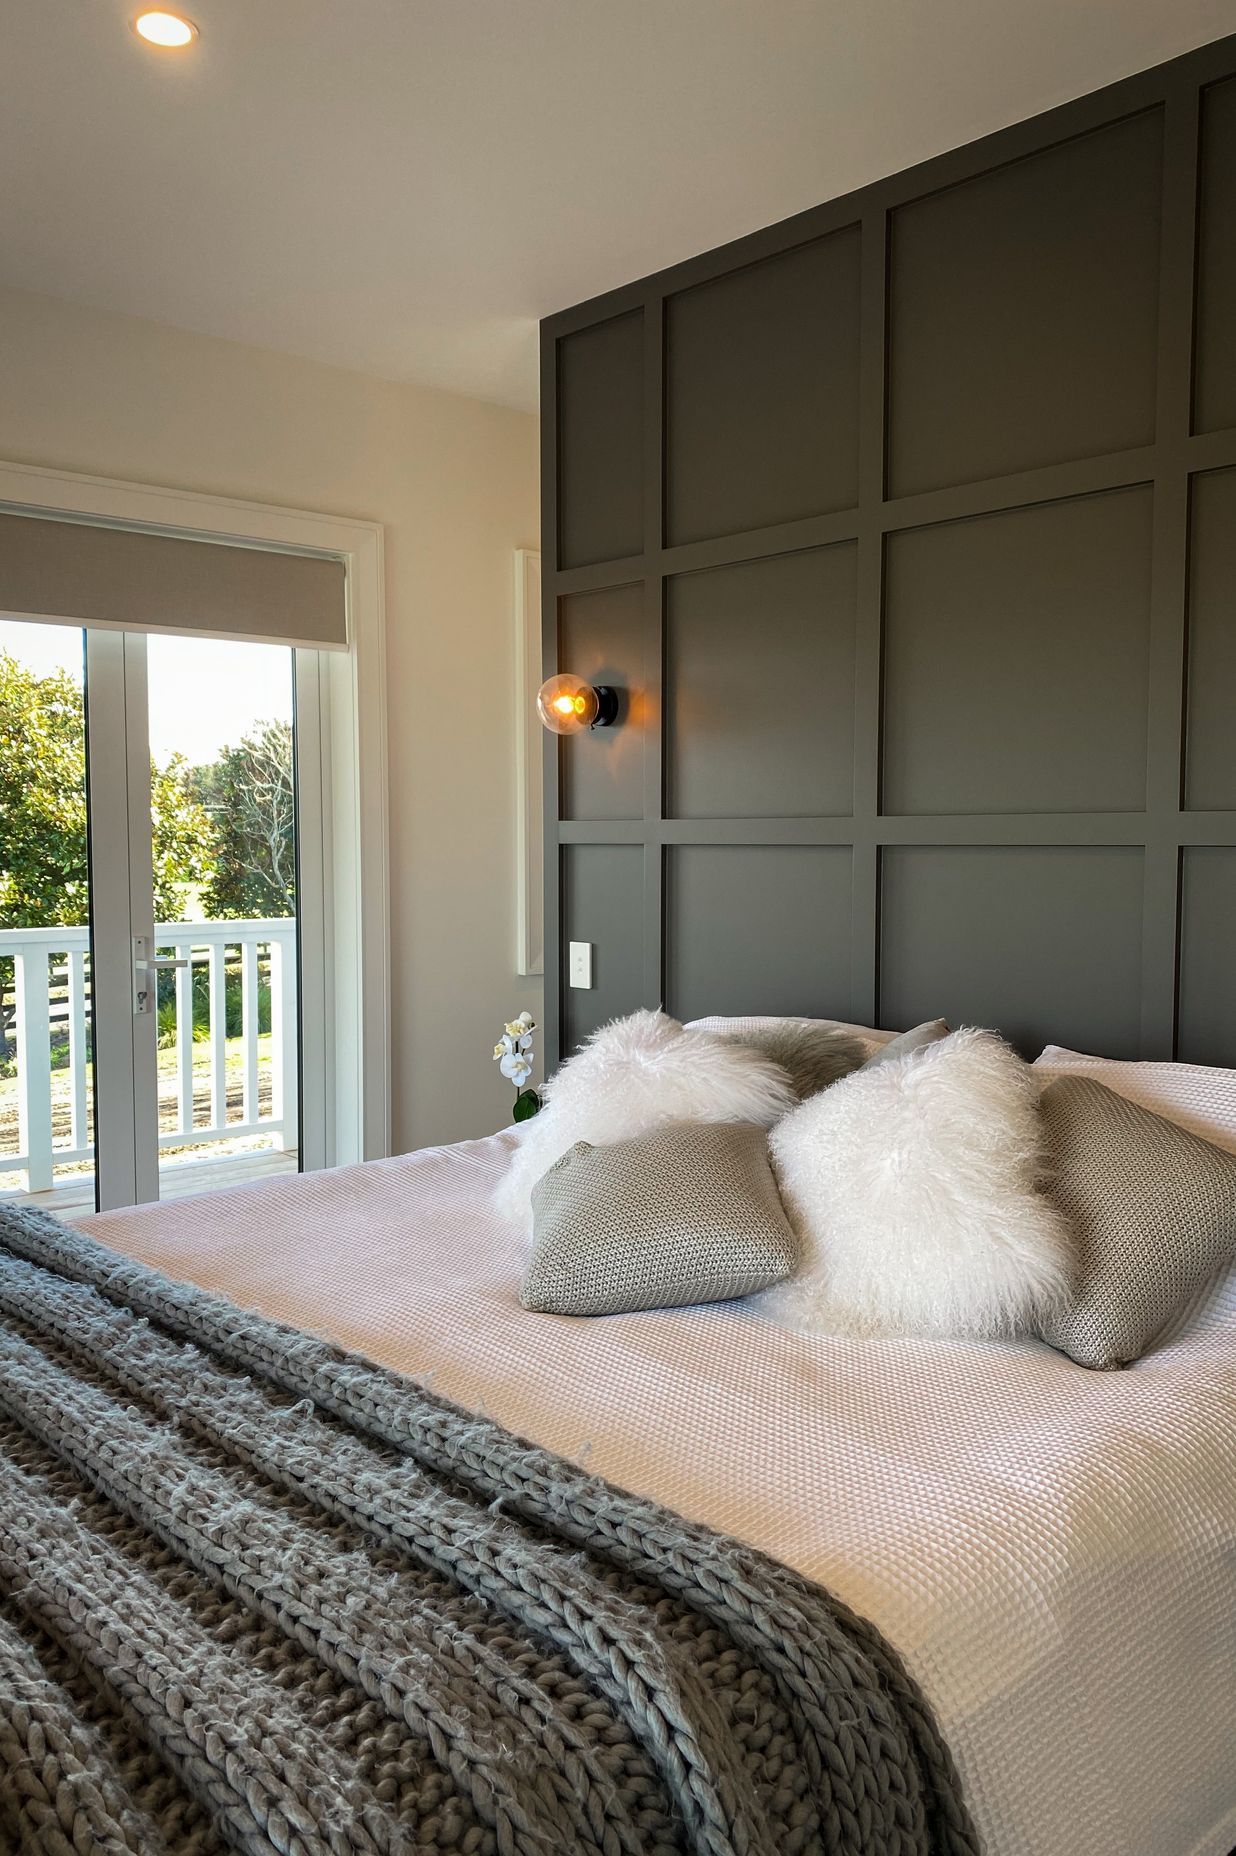 The master suite has a timber detailed feature wall leading to the walk in wardrobes.